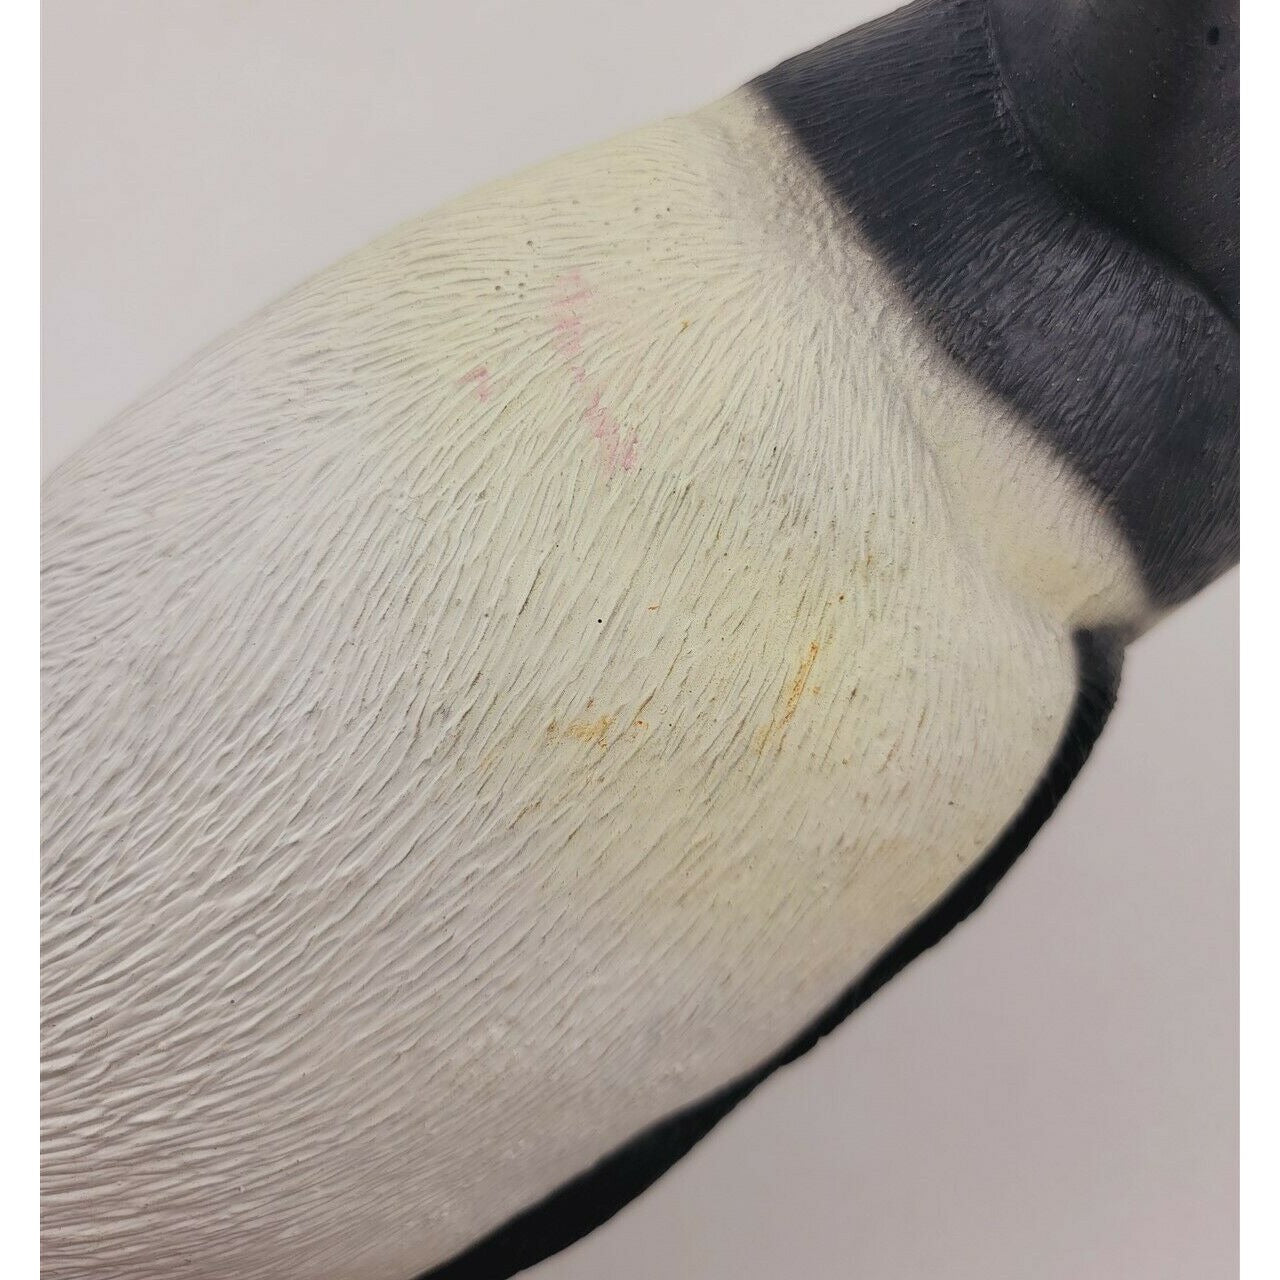 Hand Critters Penguin Mask Illusions 1993 Realistic Animal Hand Puppet